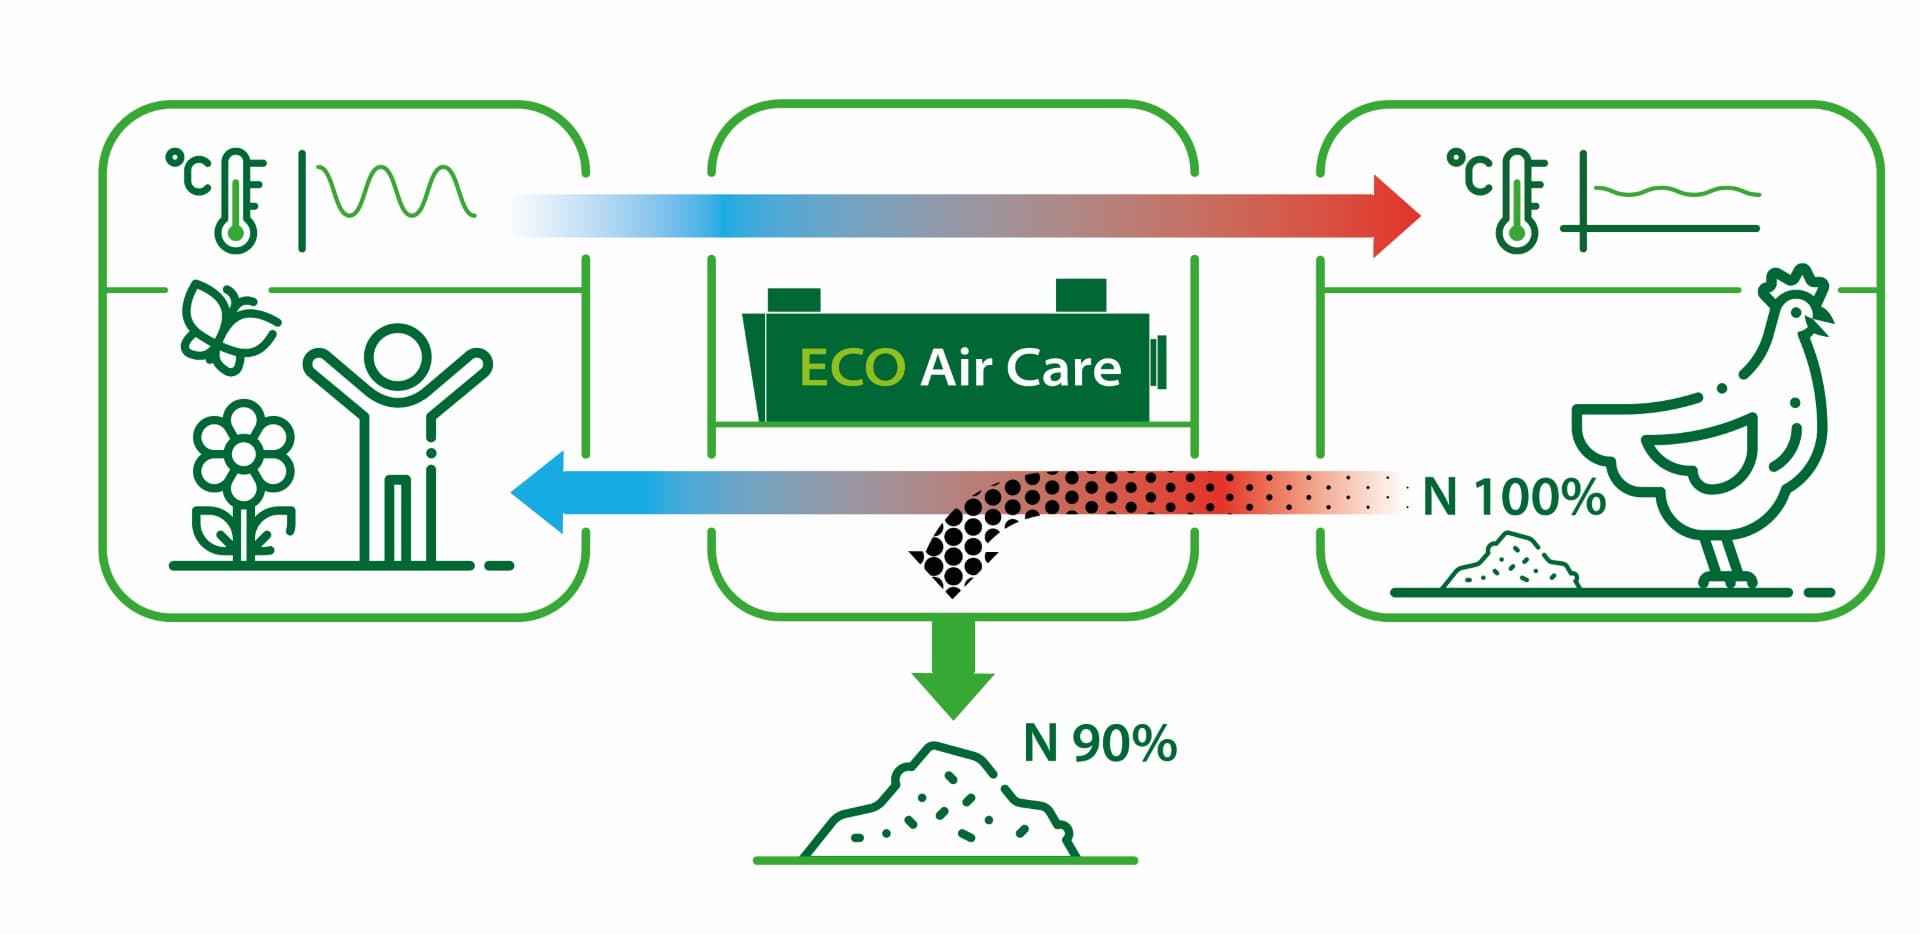 ECO Air Care (drawing) (2) (1)